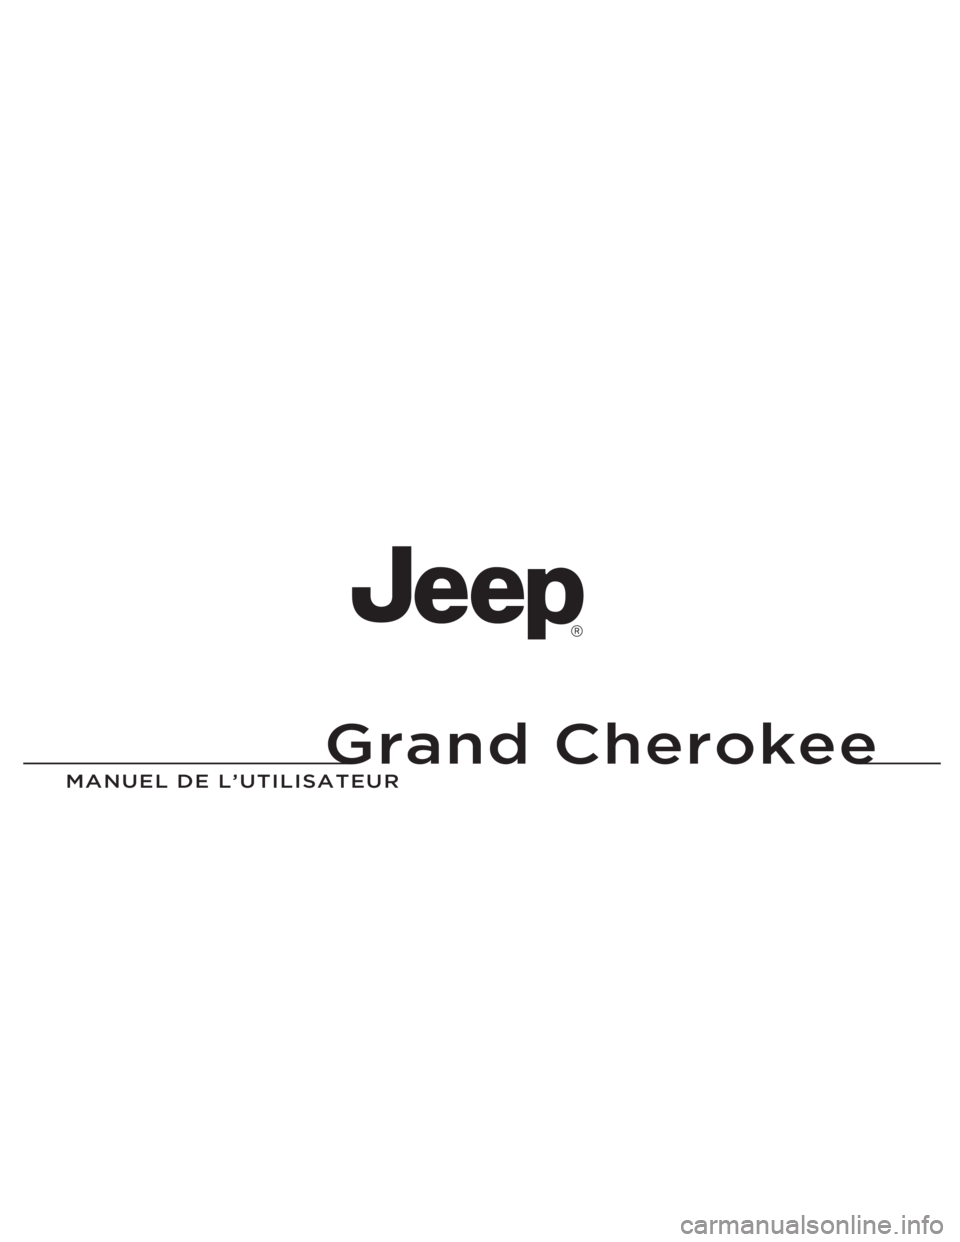 JEEP GRAND CHEROKEE 2014  Notice dentretien (in French) 